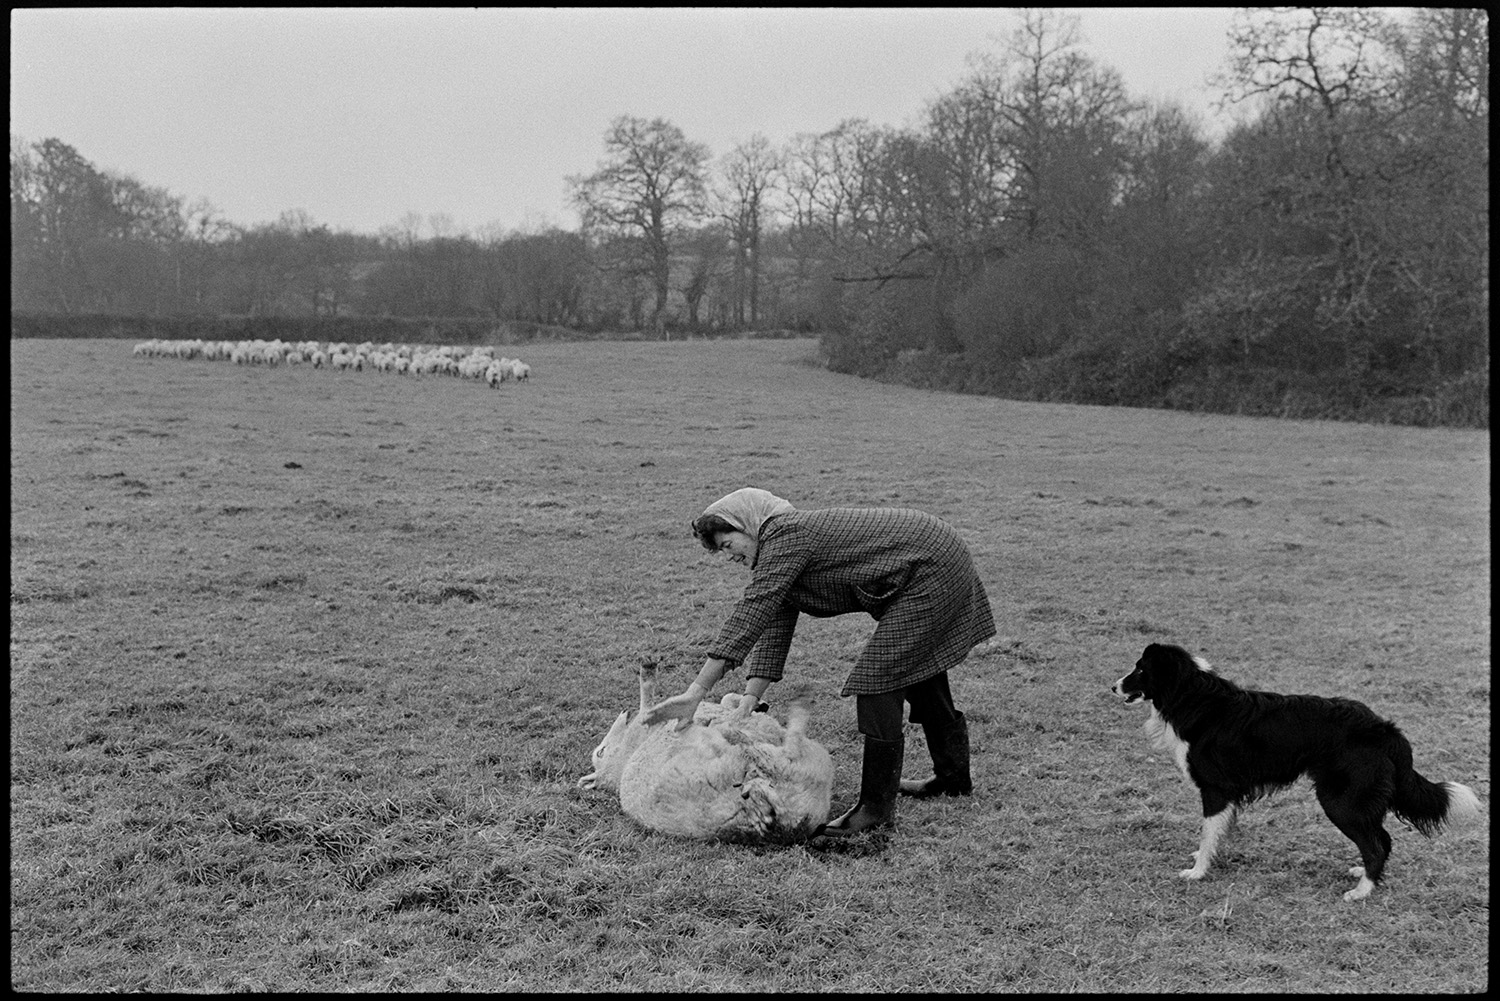 Woman checking sheep, bicycle in field. 
[A woman checking a sheep, possibly turning it over, with a dog in a field in Monkokehampton. Other sheep are visible in the background.]